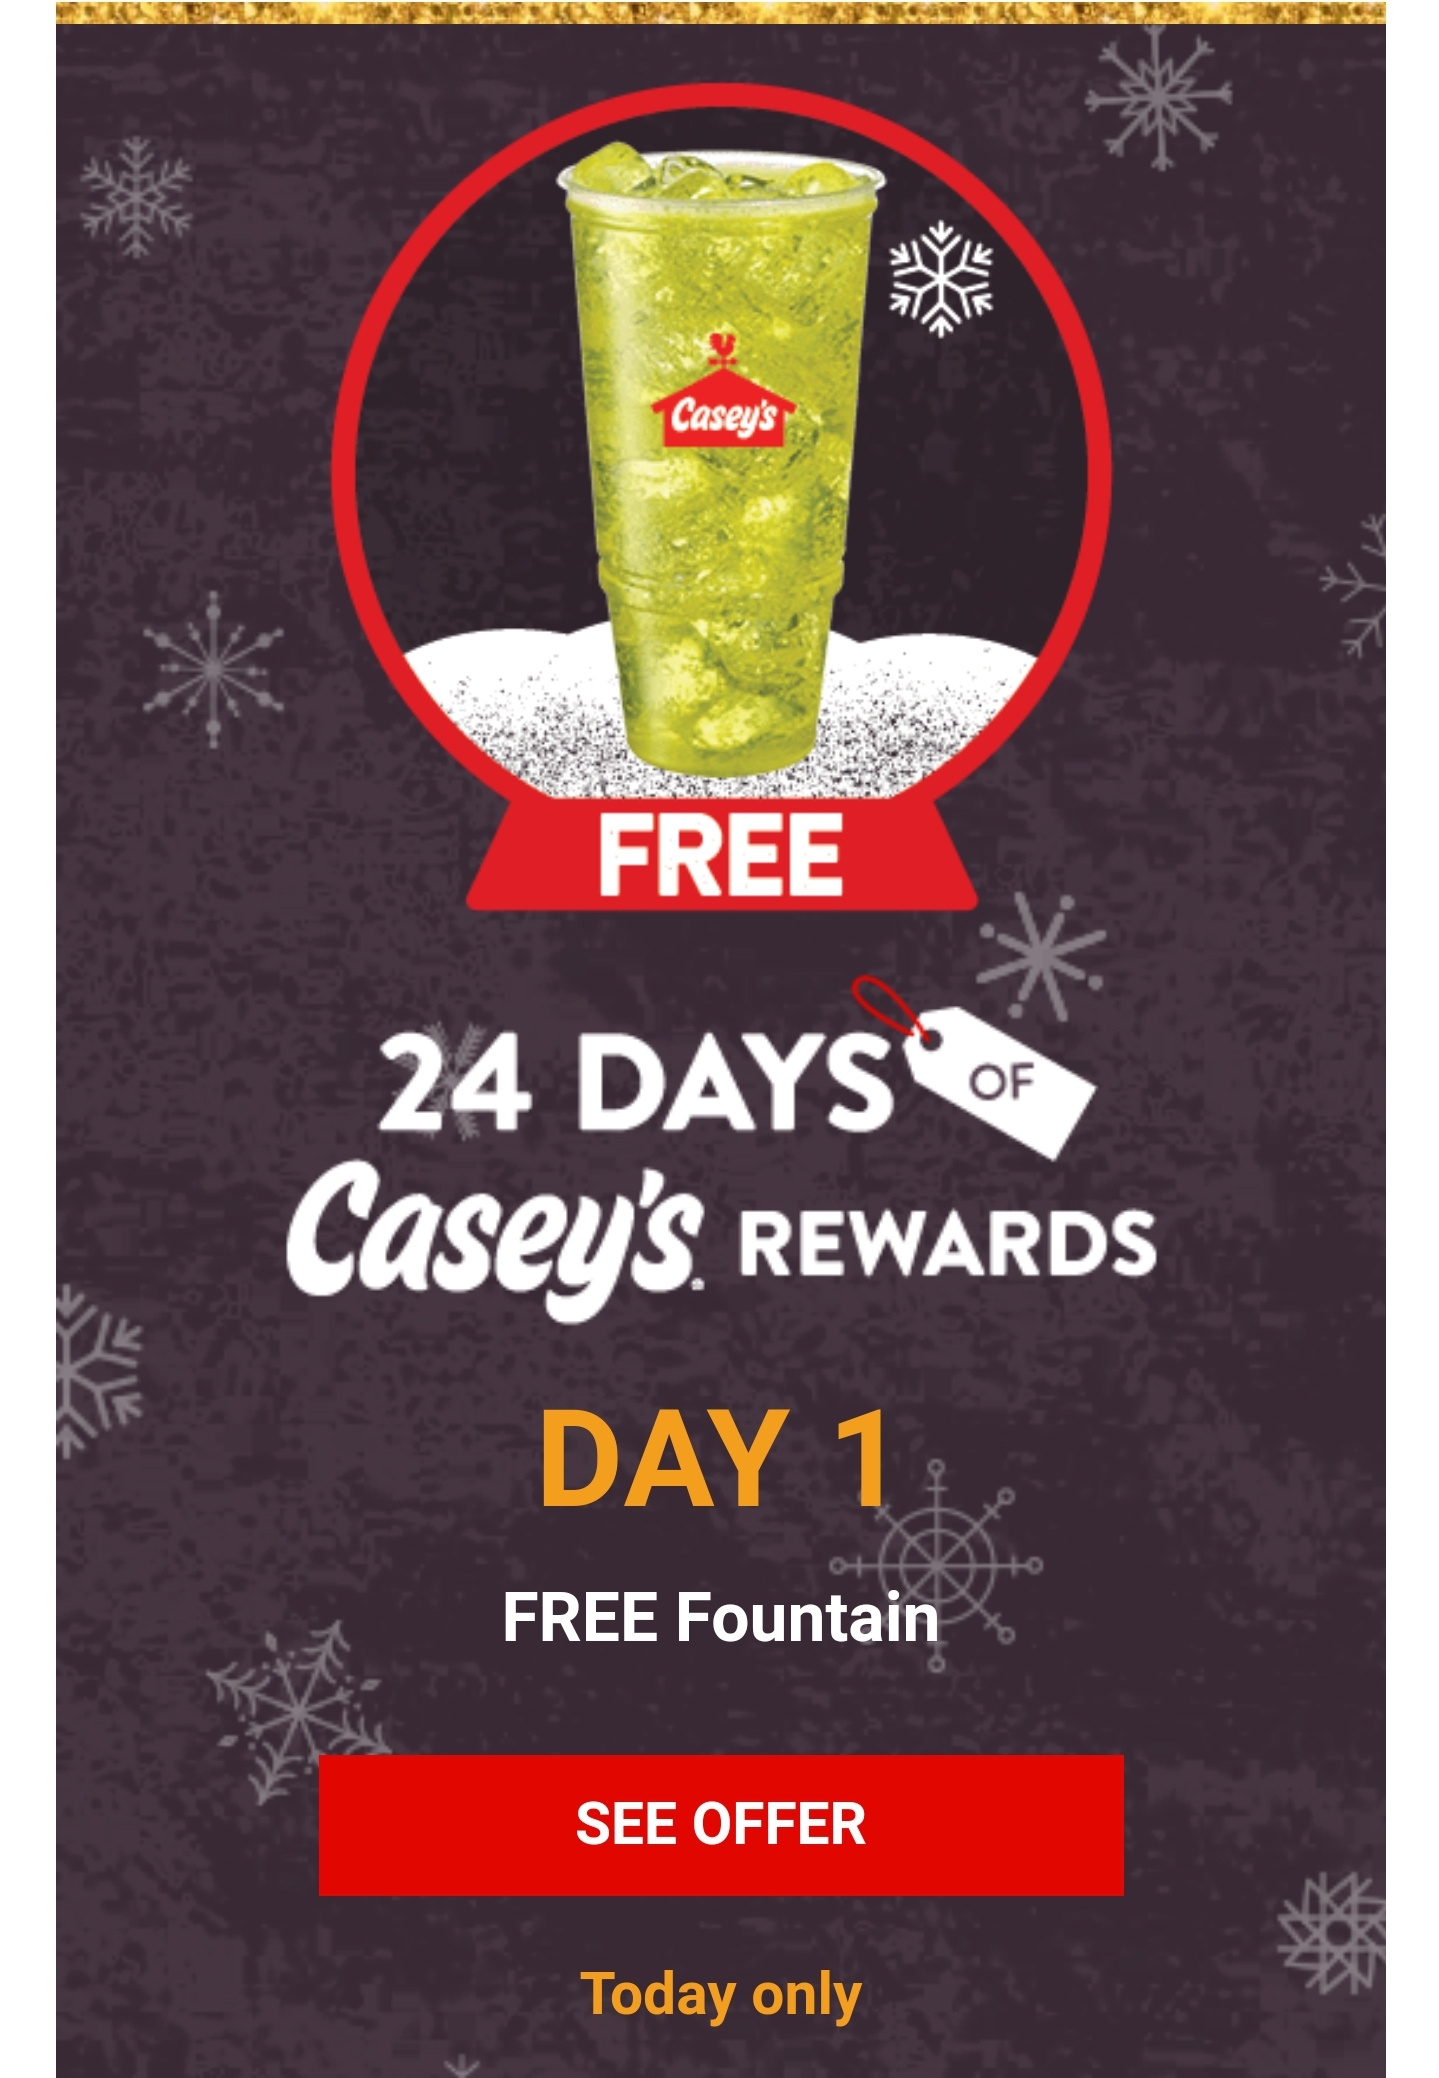 FREE Offers Every Day for 24 Days of Casey’s Rewards